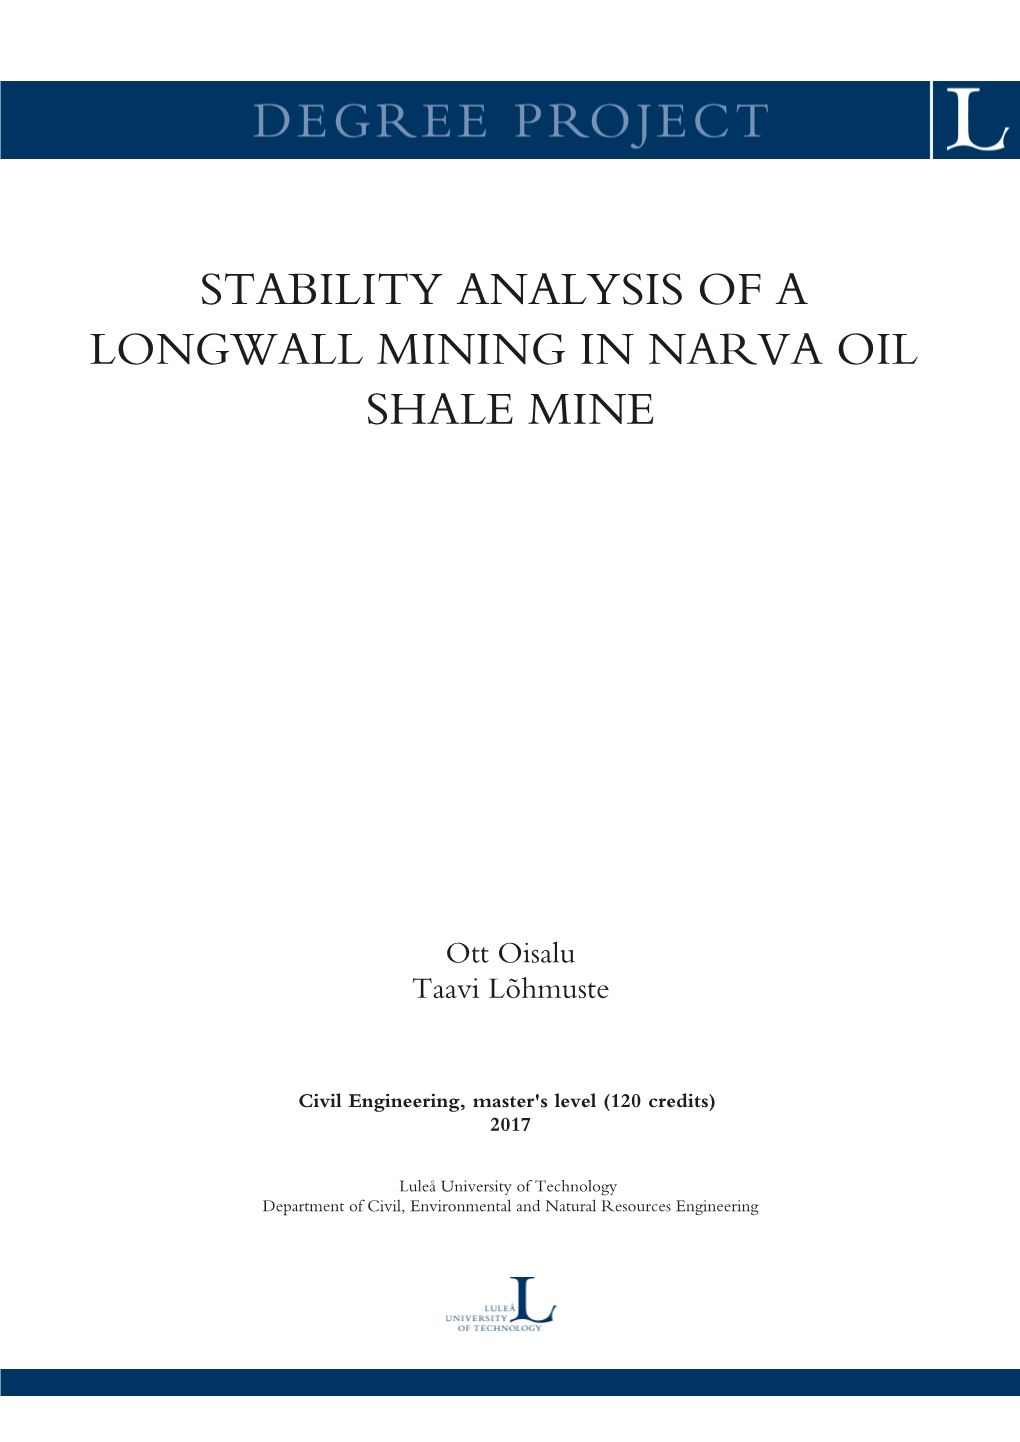 Stability Analysis of a Longwall Mining in Narva Oil Shale Mine